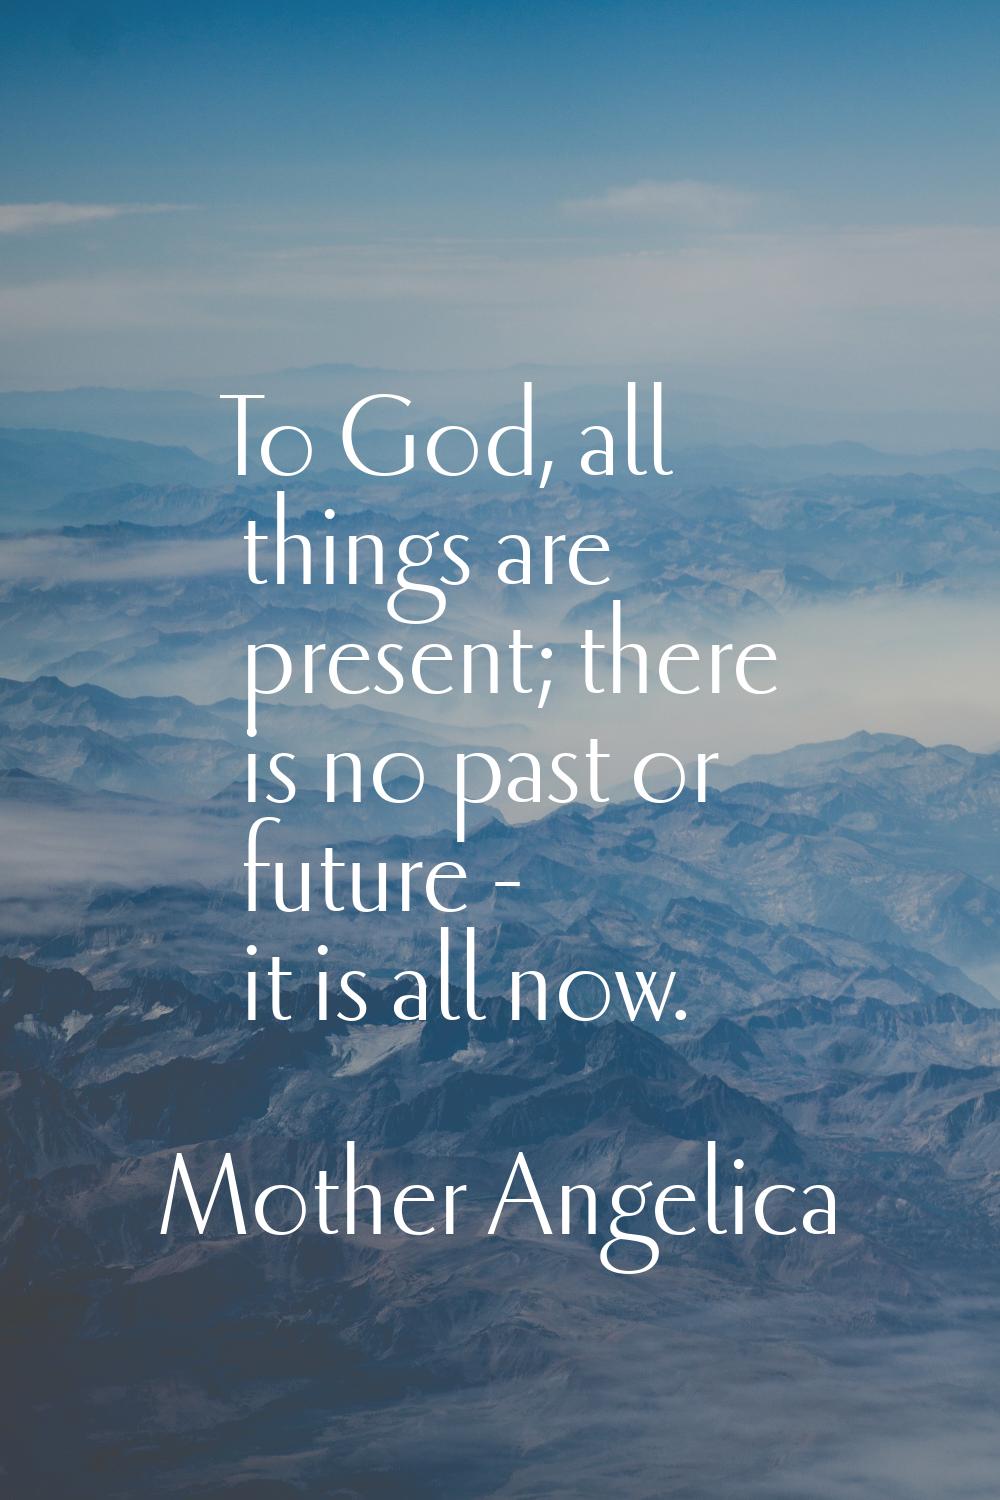 To God, all things are present; there is no past or future - it is all now.